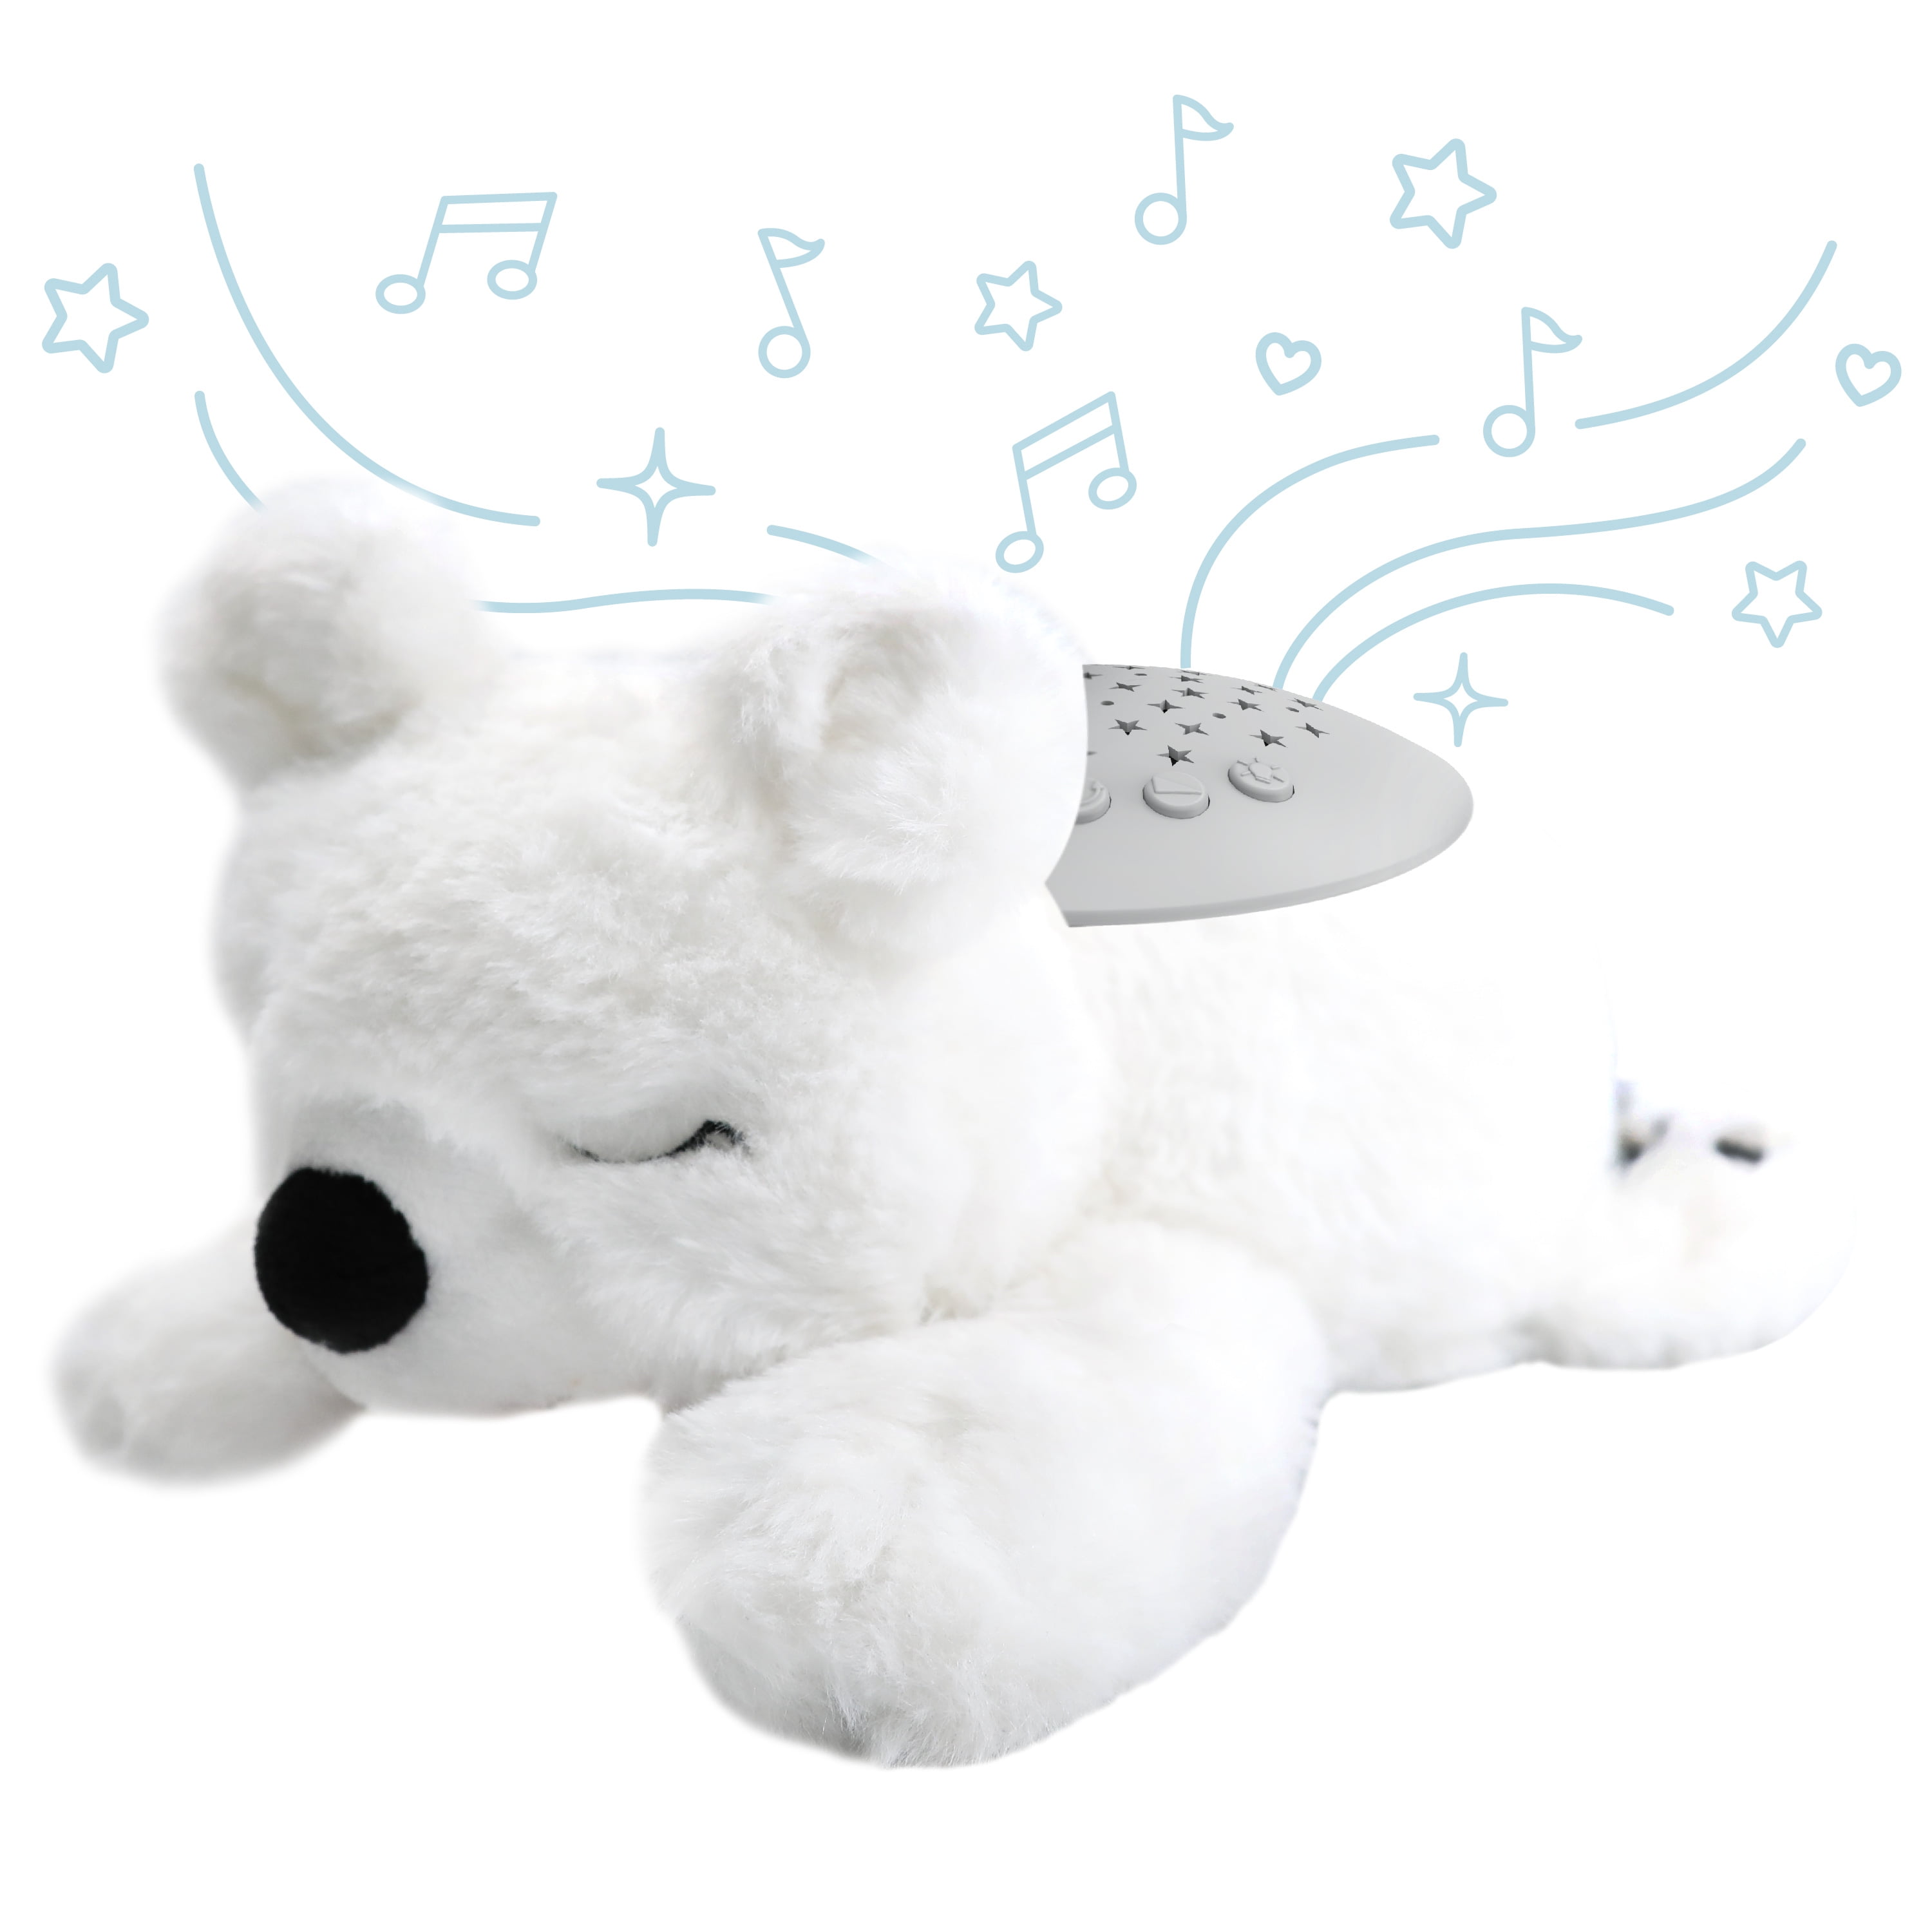 PureBaby Sound Sleepers Portable Sound Machine & Star Projector - Plush  Sleep Aid for Baby and Toddlers with Soothing Night Light Display, 10  Lullabies, White Noise, and Heartbeat Sounds (Polar Bear) 